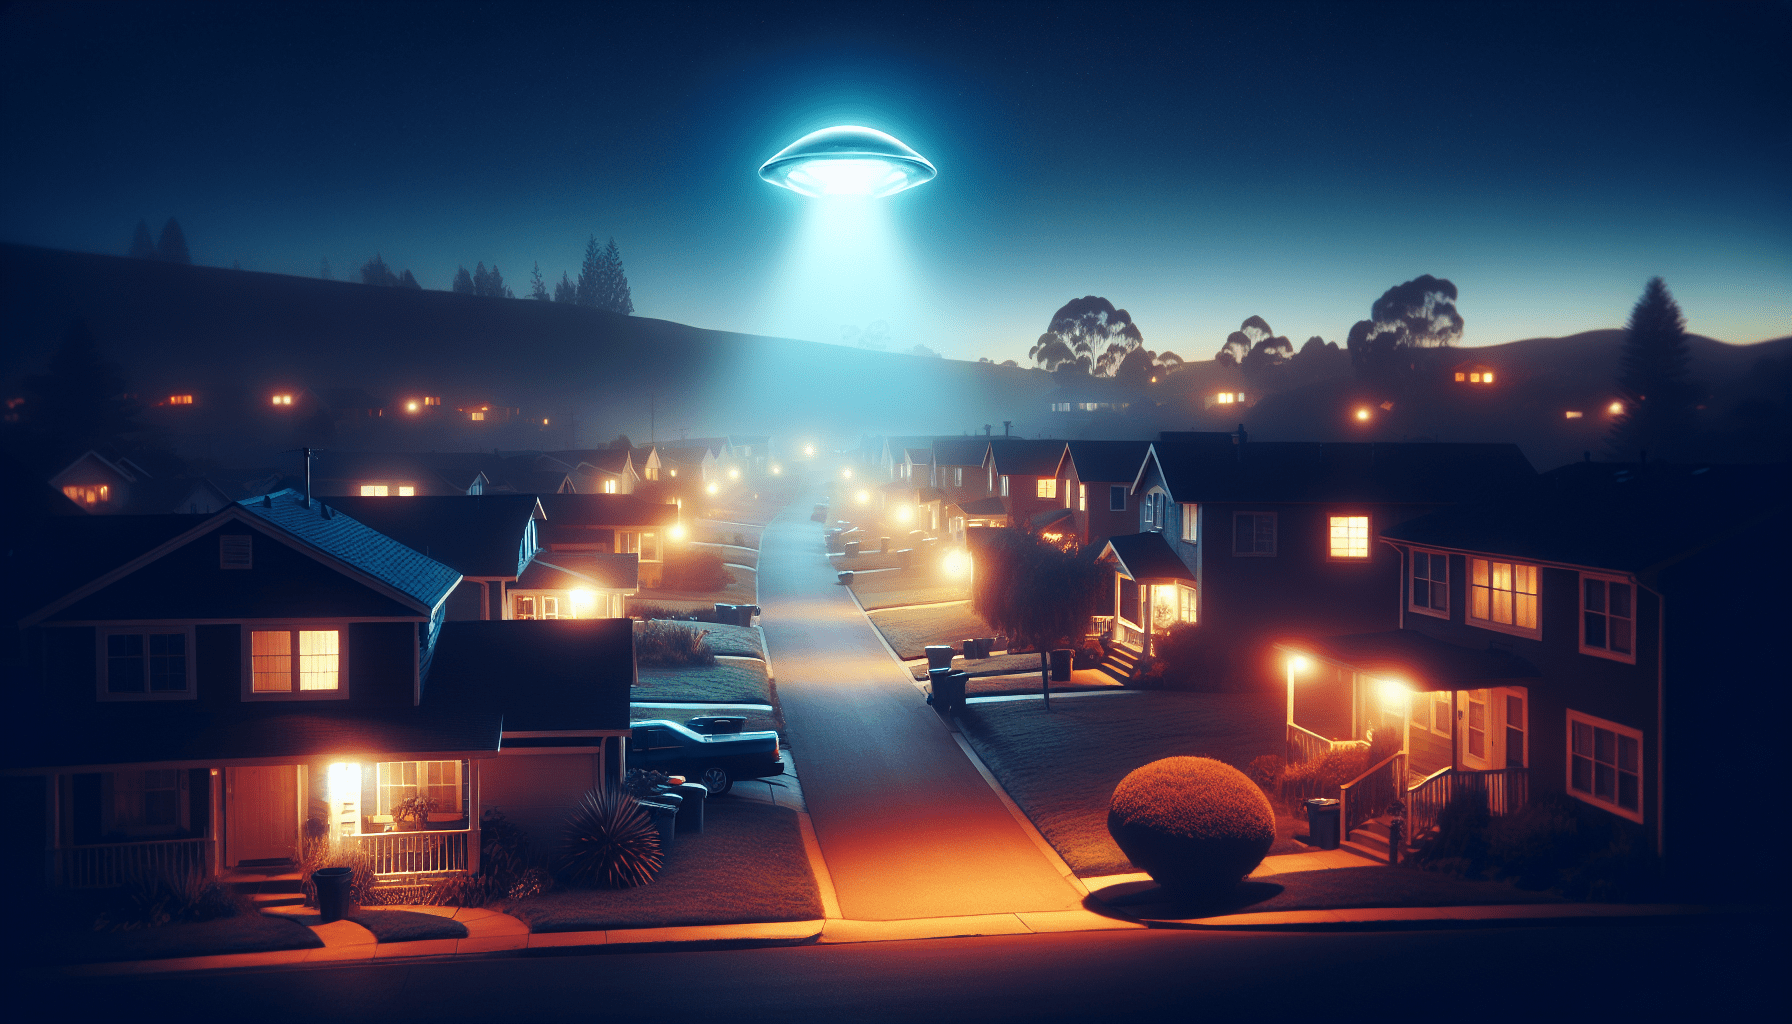 Most Popular Alien Abduction Stories And Experiences